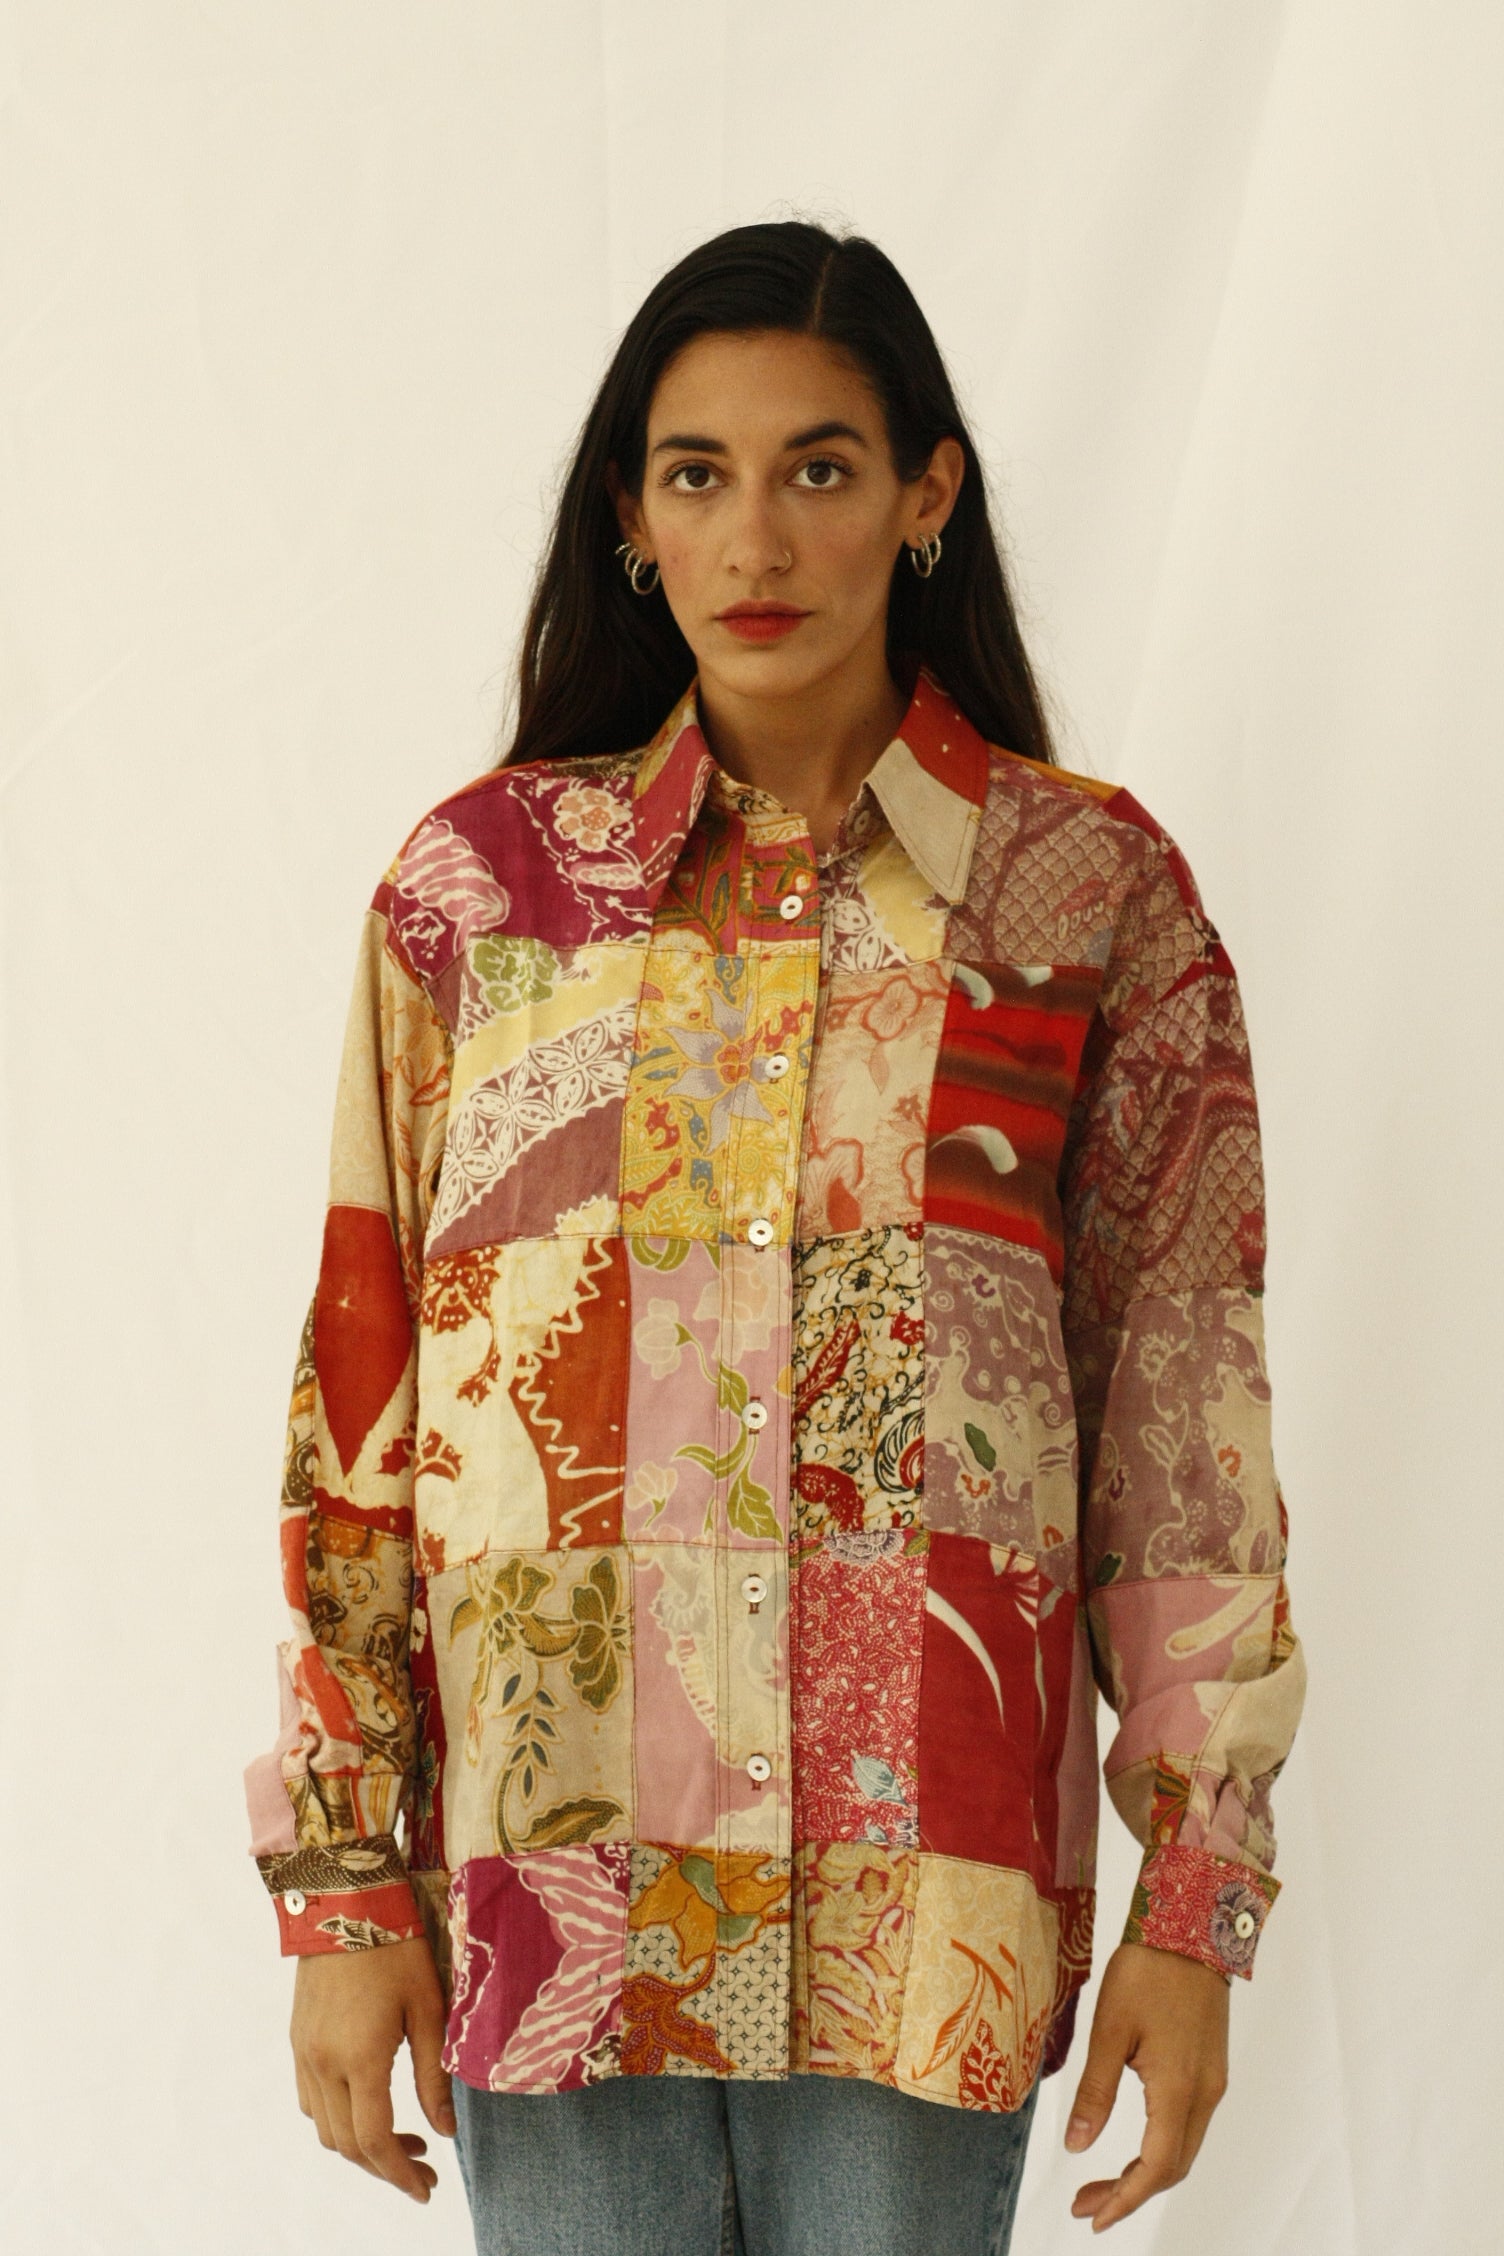 The fabric of this garment was found in Nishiki Market, Kyoto. The design was inspired by the street style, art and architecture of Japan. Deadstock pieces of fabric from India, Africa and Japan sewn together. Patchwork shirt with history, a statement garment for a lifetime. INGREDIENTS 100% cotton Mother of pearl buttons (concha de nacar) Ethically made in Ecuador. Sustainable fashion, handmade, natural fibers, vintage textiles and upcycled materials.